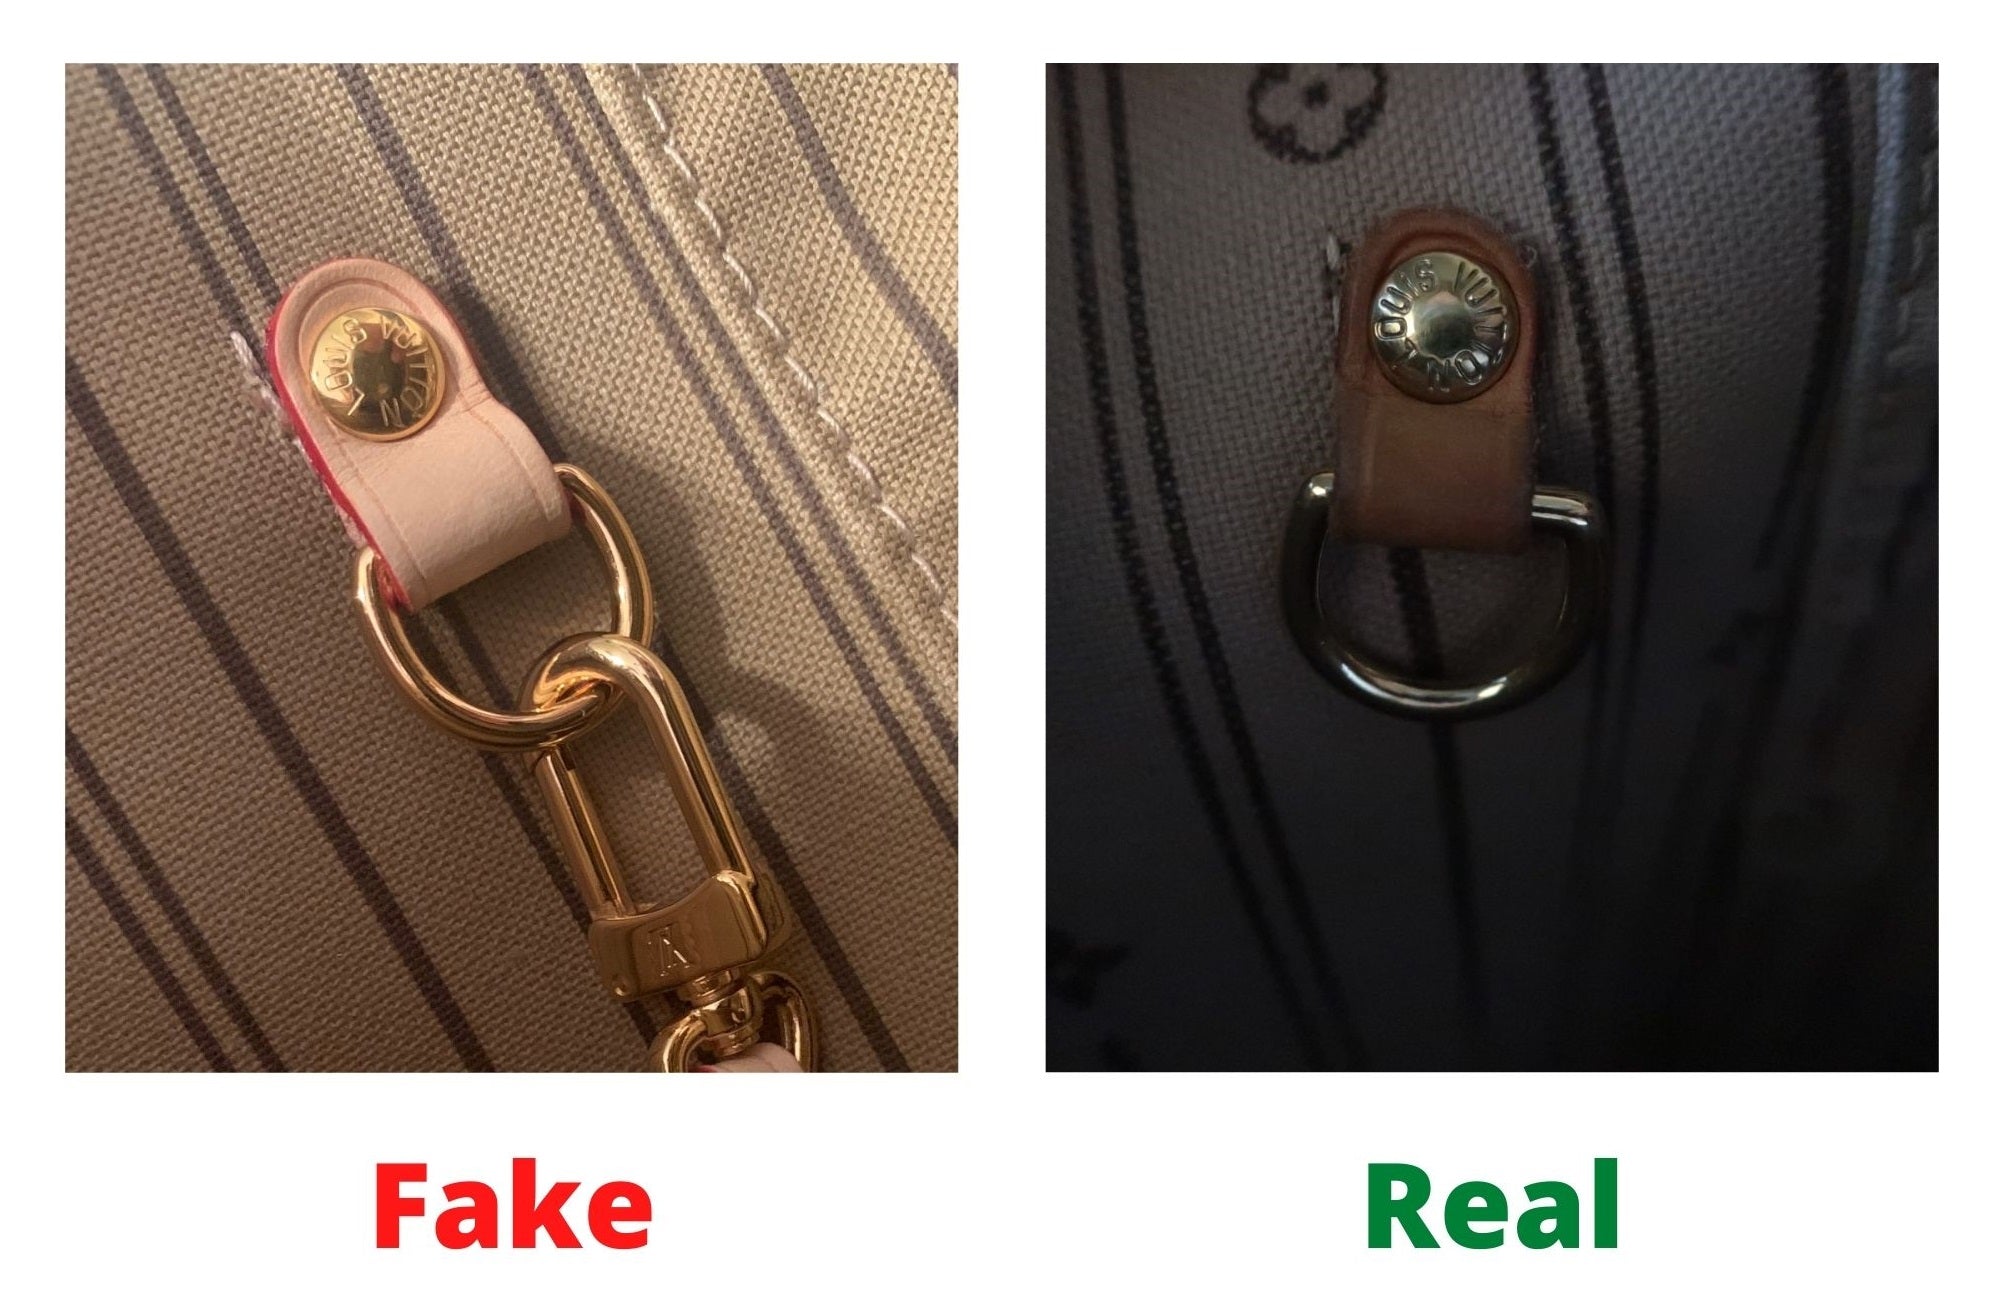 Fake Louis Vuitton Neverfull vs Real: Important Details You Should Definitely Pay Attention To (With Photo Examples) Fake vs Real Neverfull Monogram internal element